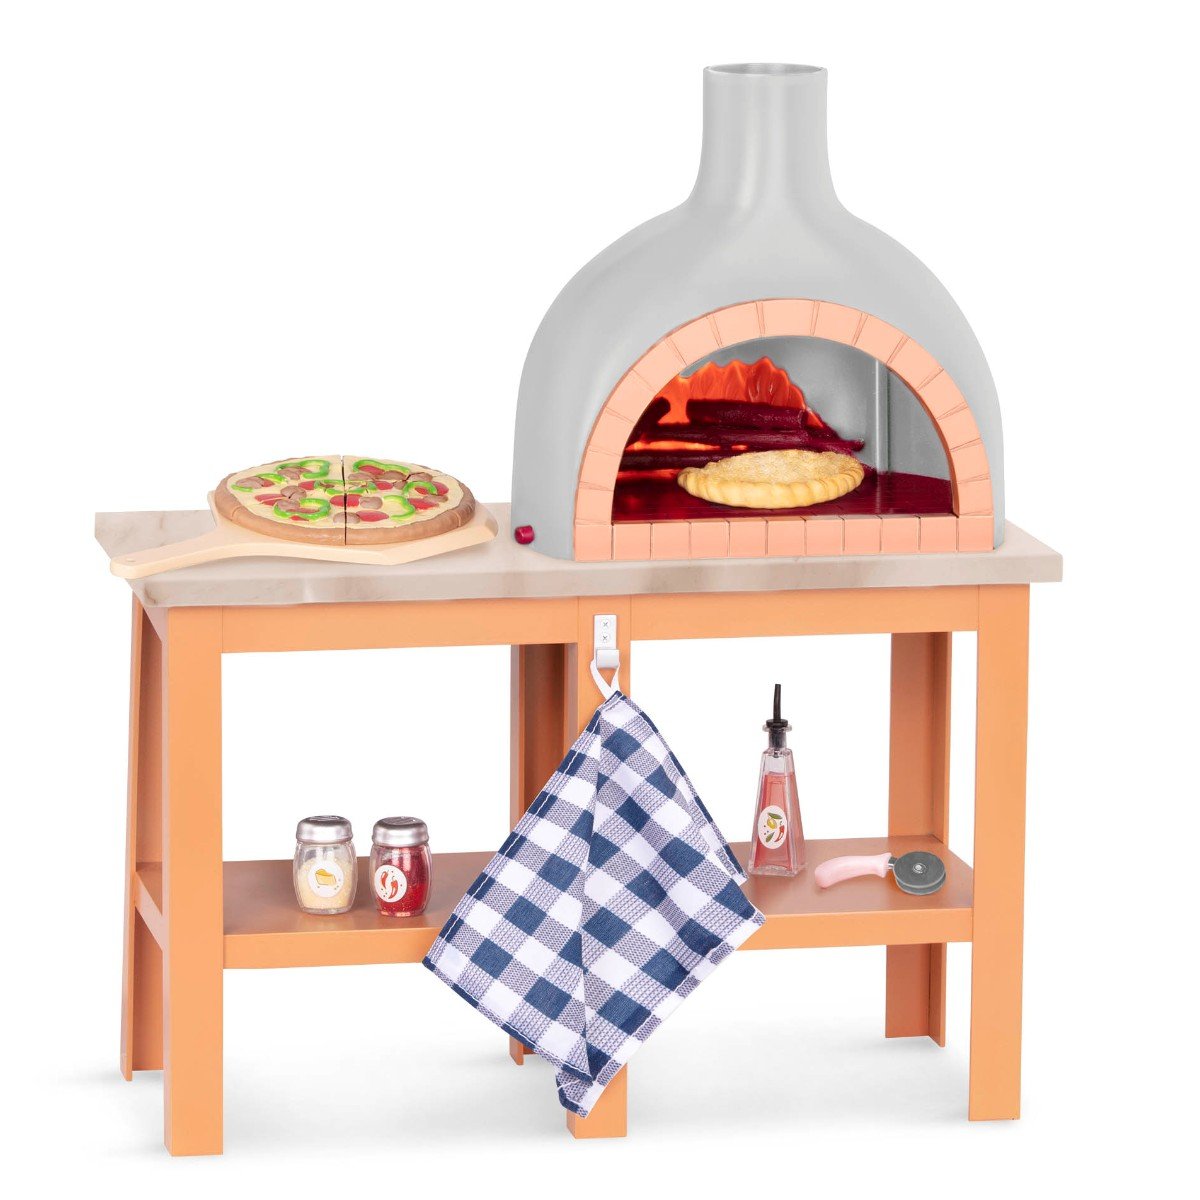 Our Generation - Pizza Oven Playset (737953)